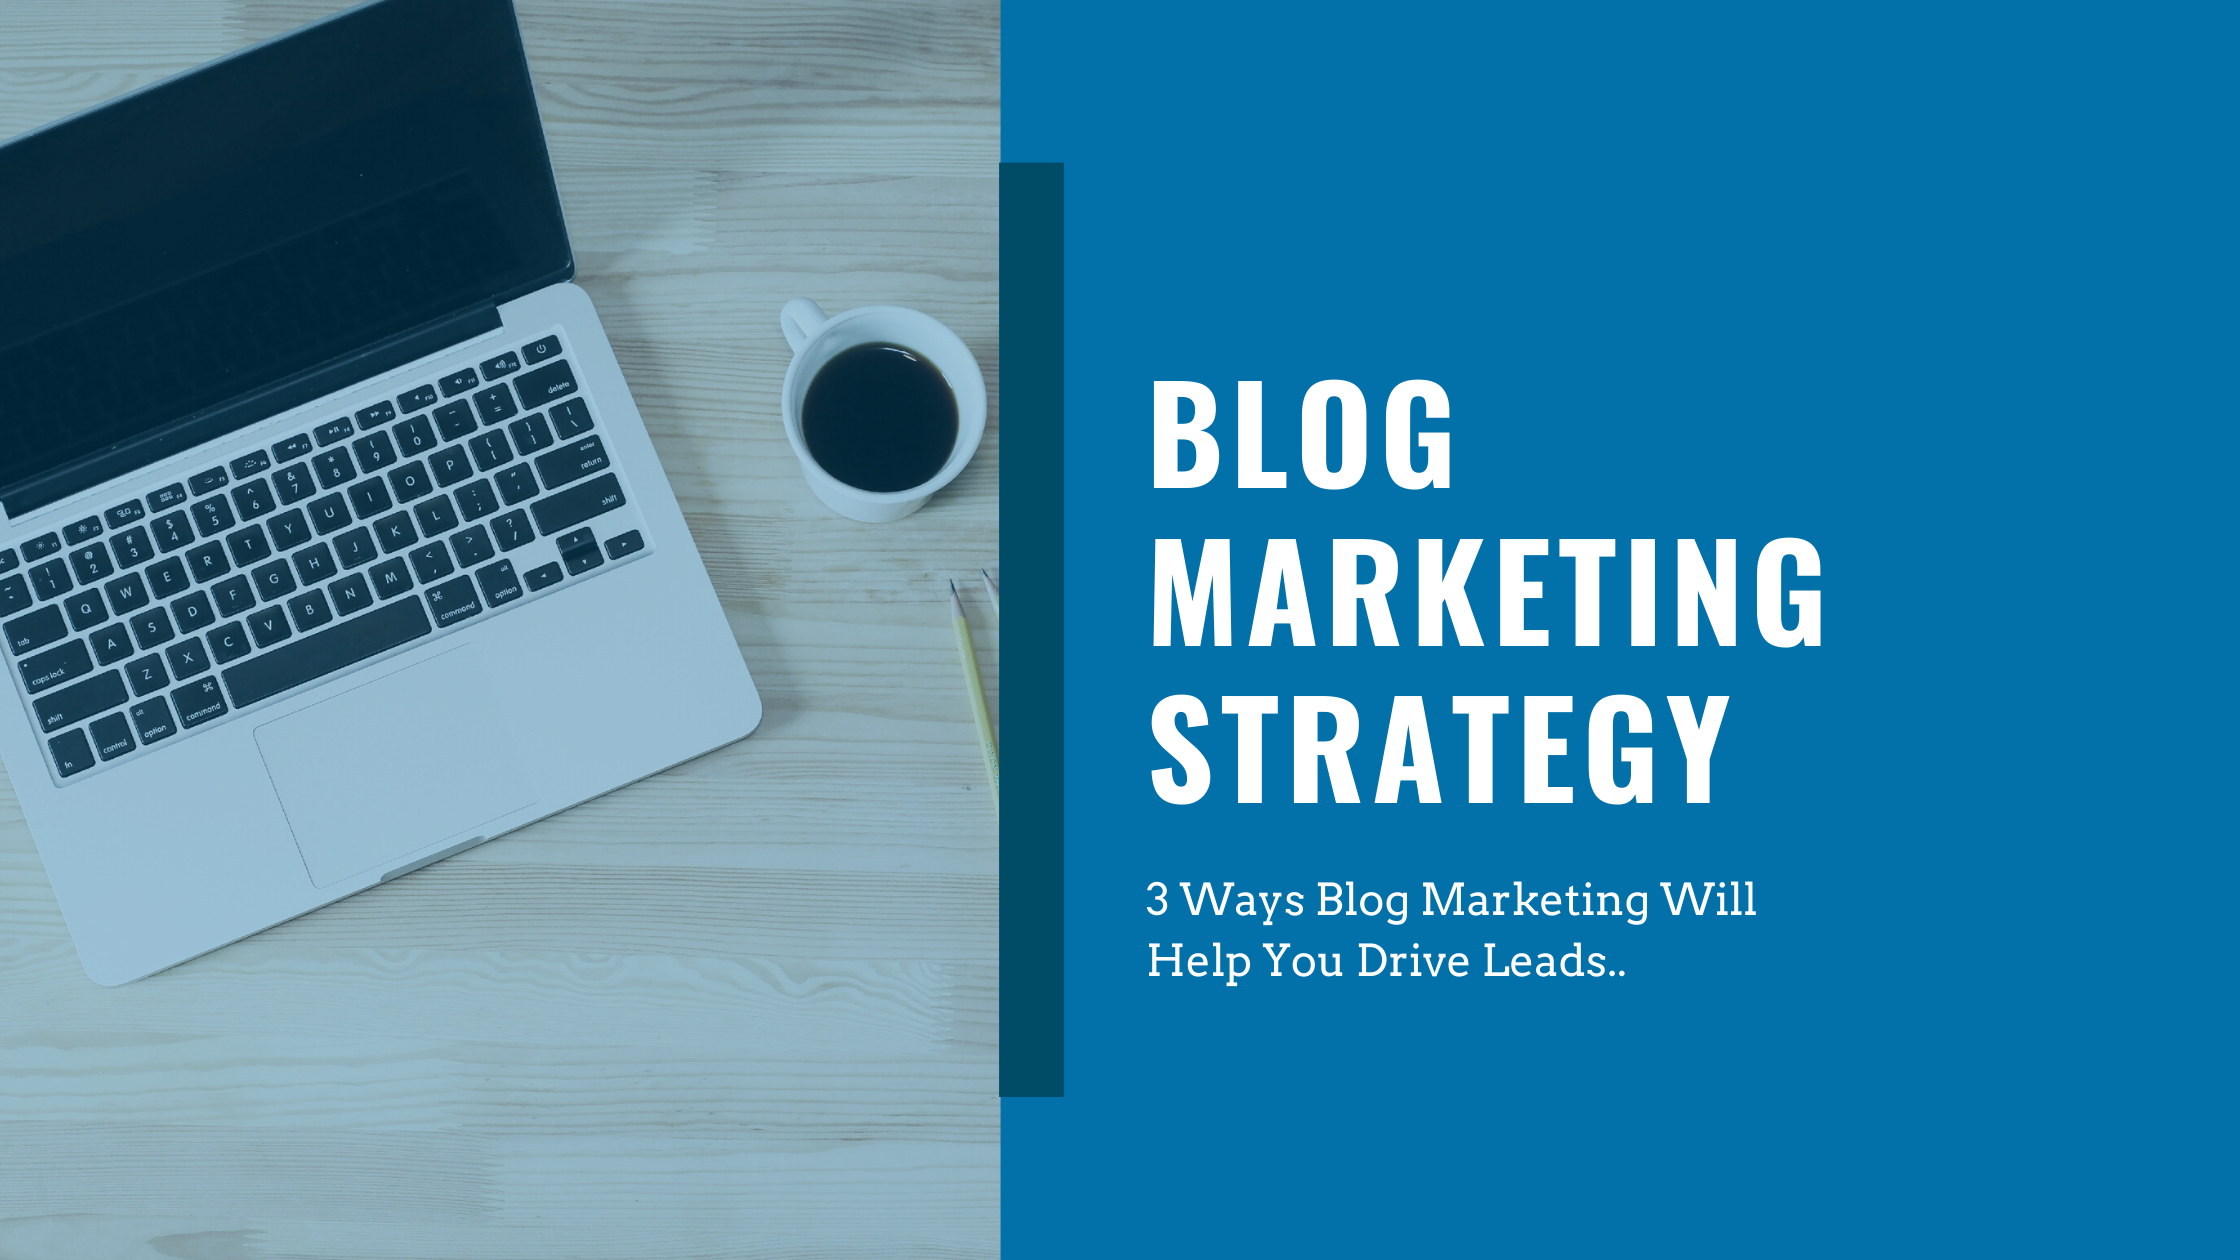 Blog Marketing Strategy for Your Business